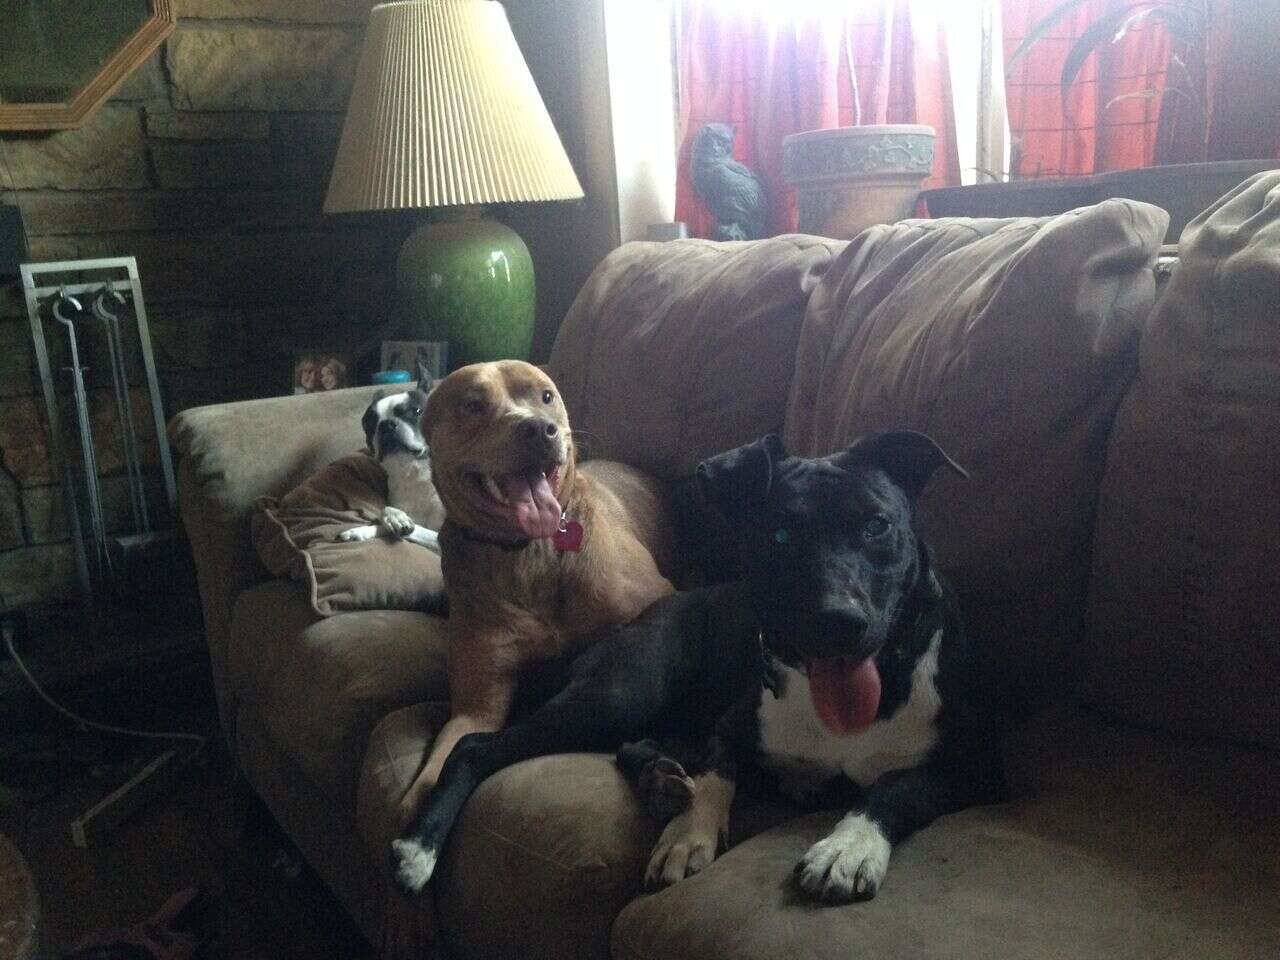 Dogs relaxing on couch